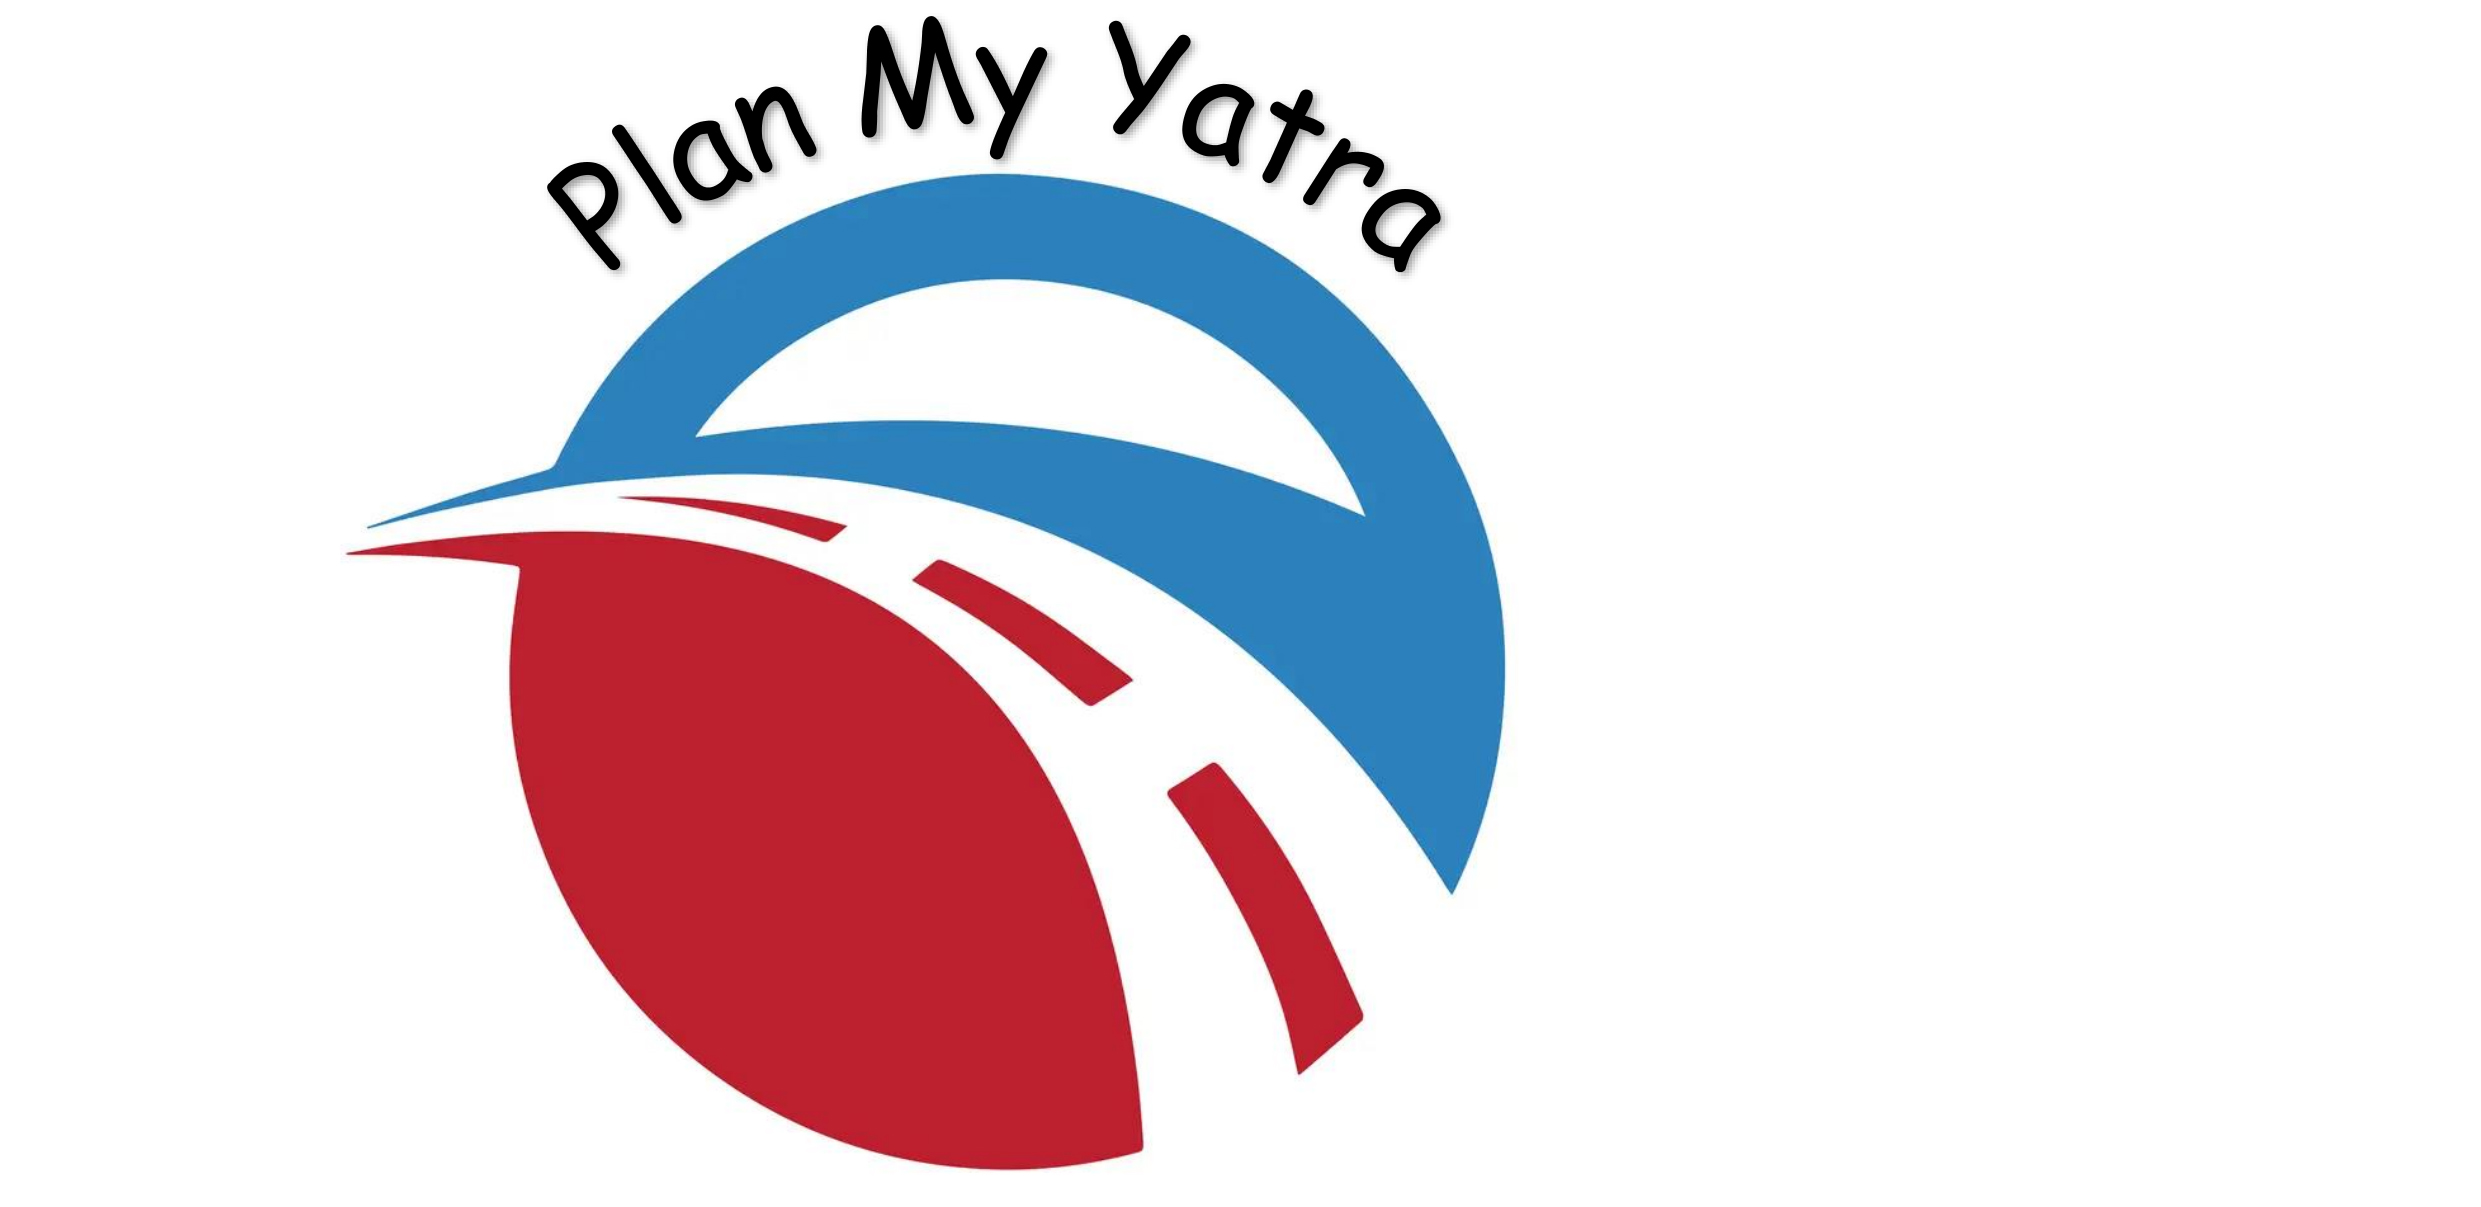 Yatra Help - File Online Complaint to Yatra Ltd & Grievance Officer